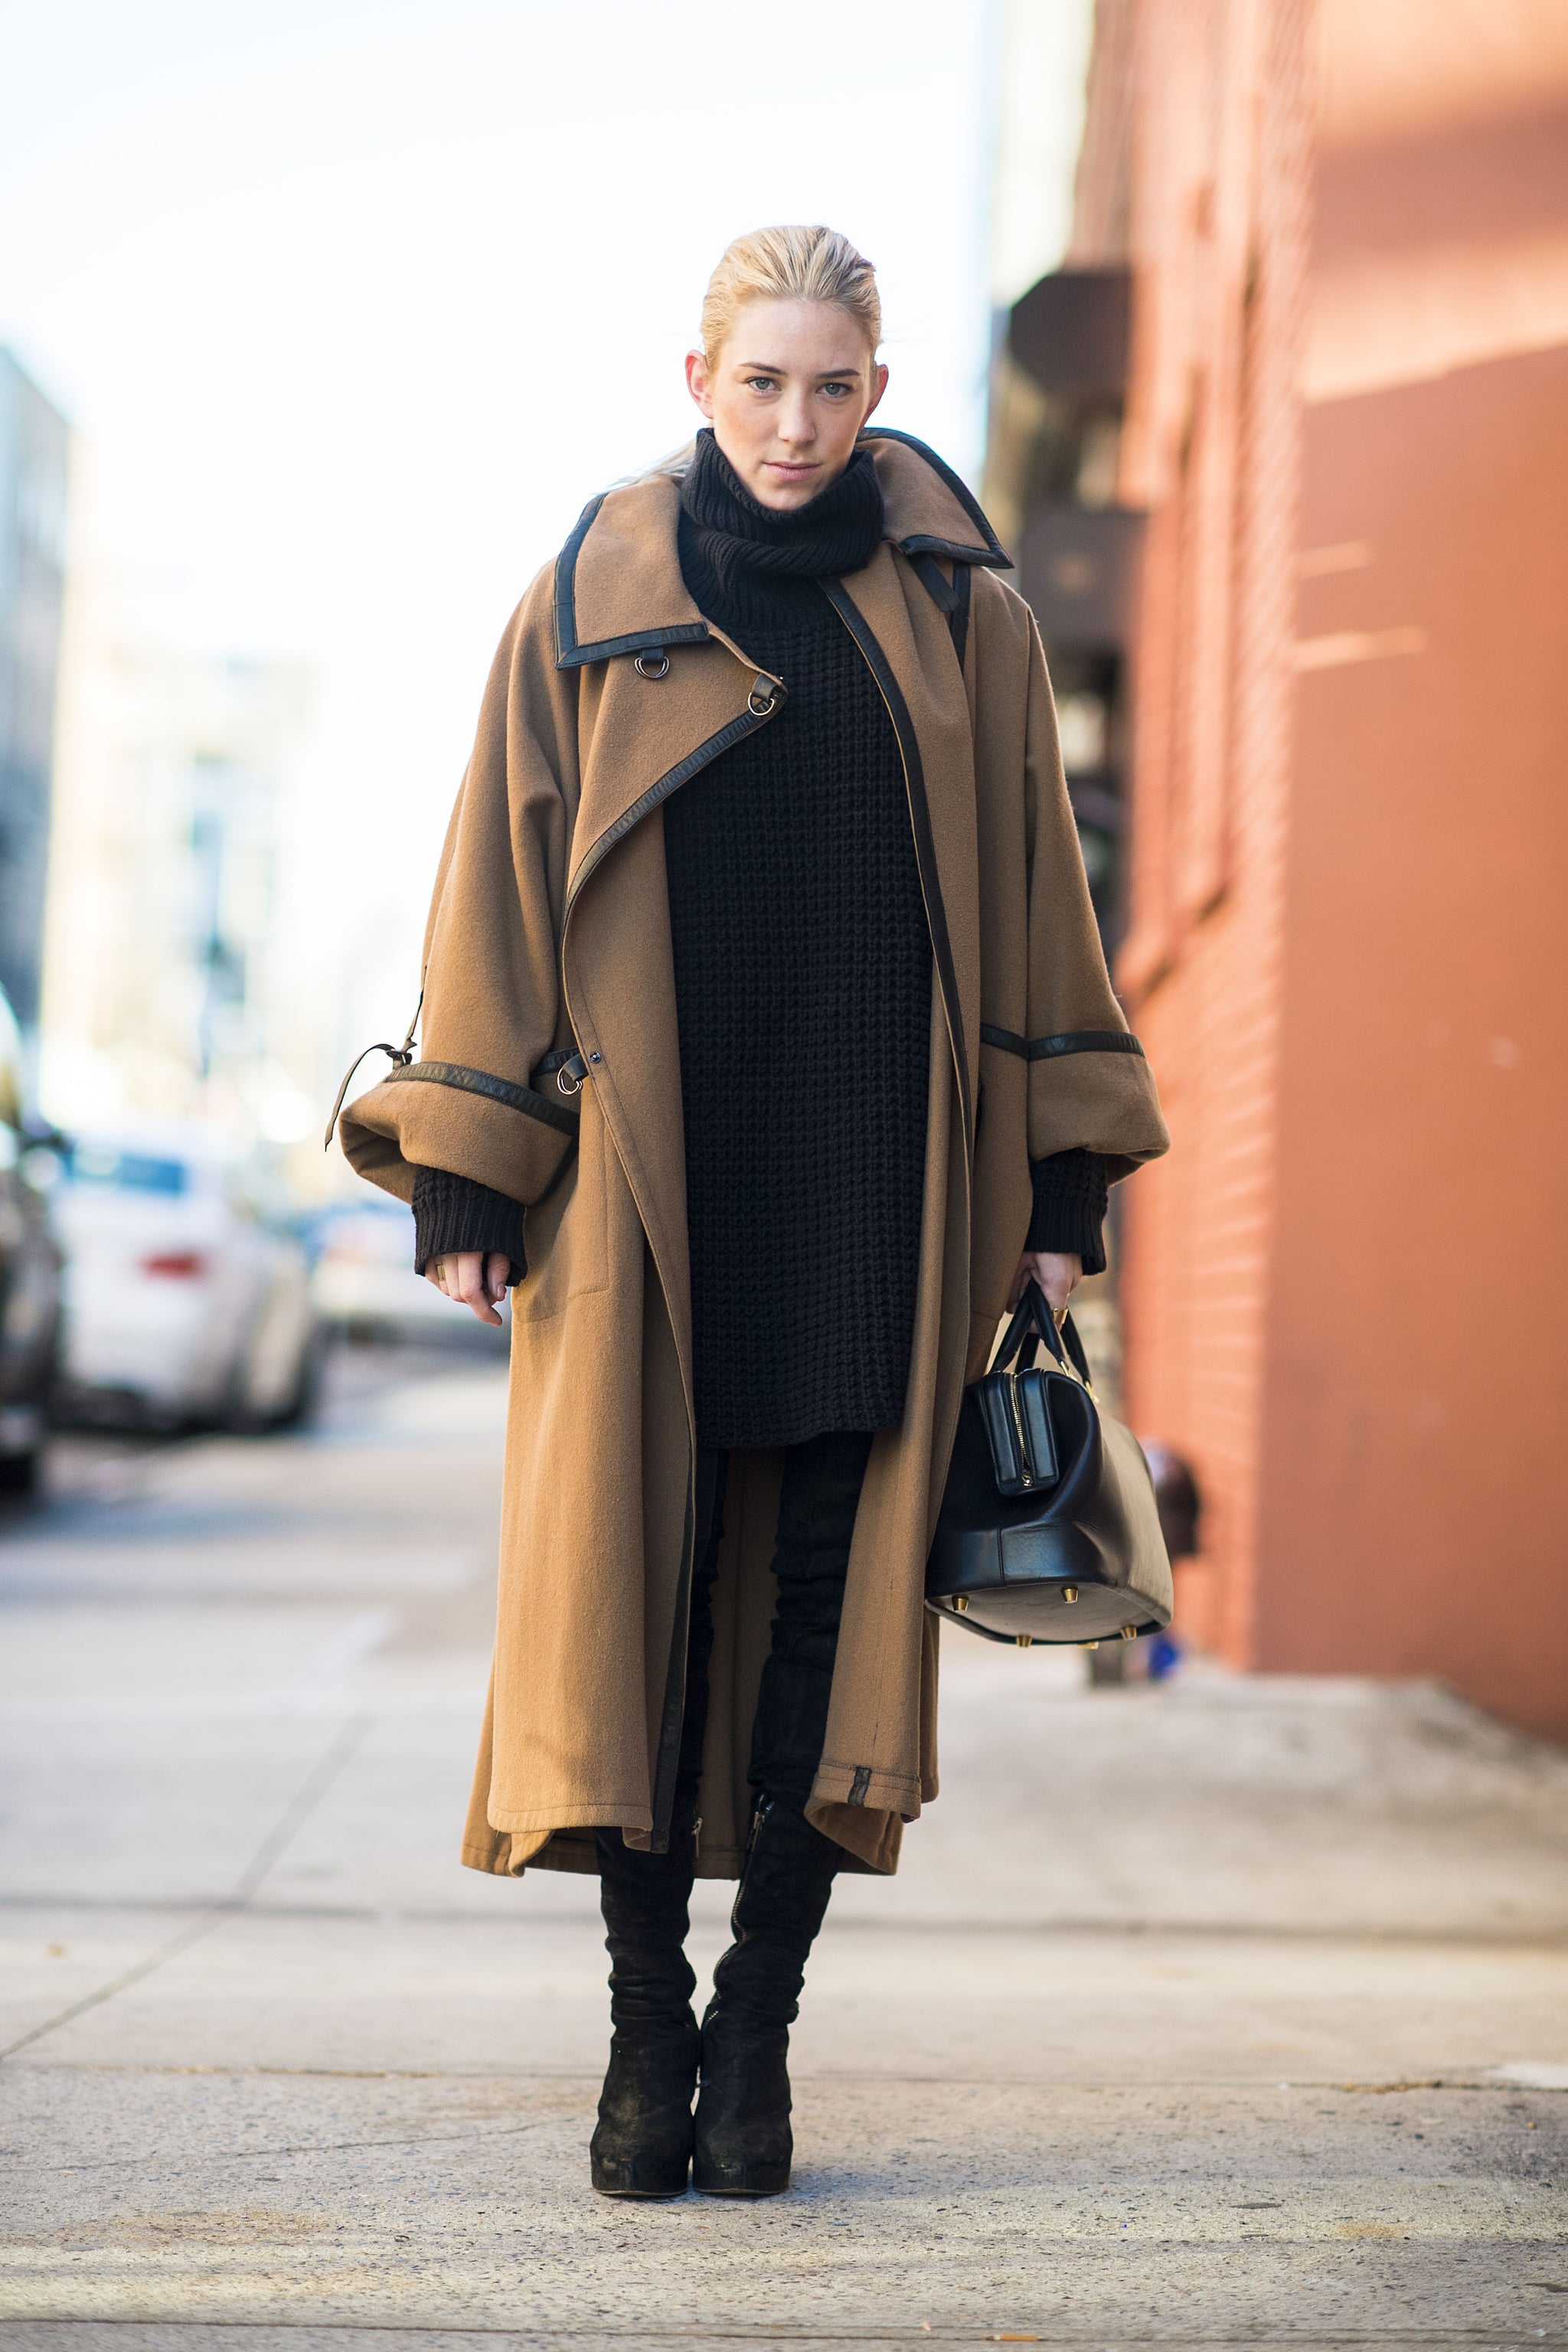 70+ Winter Street Style Looks to Inspire Your Outfits